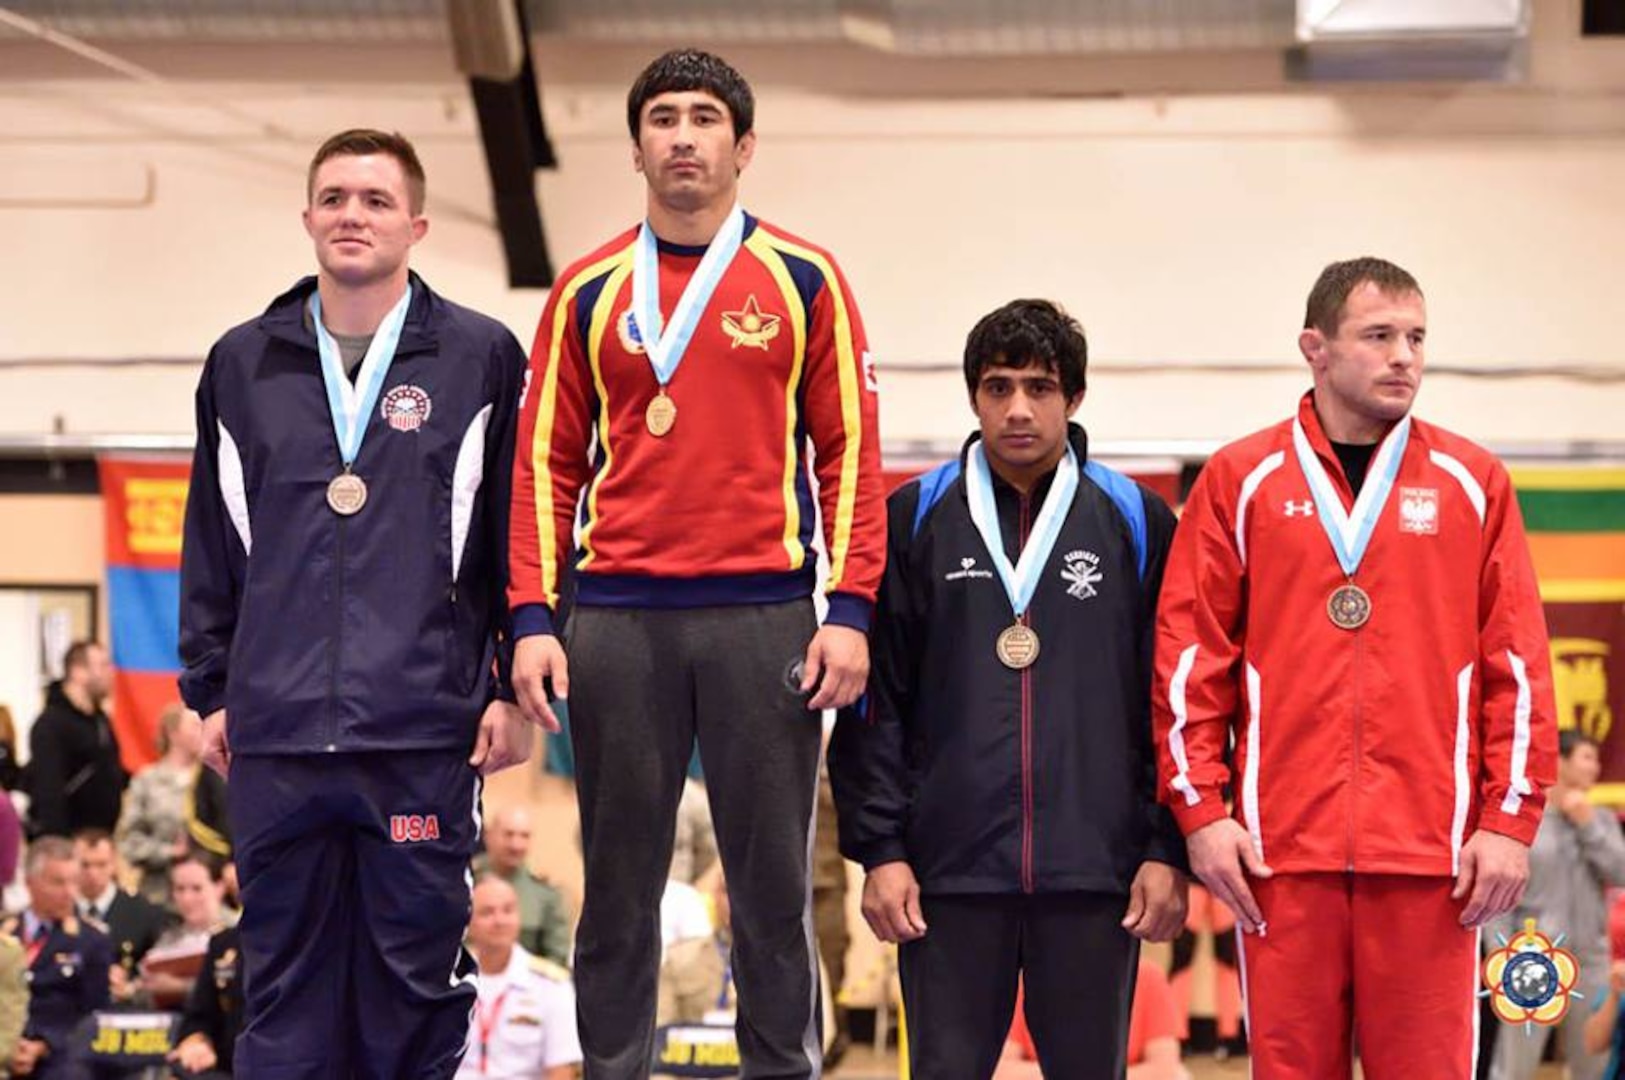 Army Sgt. Moza Fay (left) wins silver in the 74kg Freestyle competition at the 29th CISM World Military Wrestling Championship at Joint Base McGuire-Dix-Lakehurst, New Jersey 1-8 October 2014

Gold –Galymzhan Userbayev (Kazakhstan)
Silver - Moza Fay (USA)
Bronze – Vipin (India)
Bronze –Krystian Brzozowski (Poland)